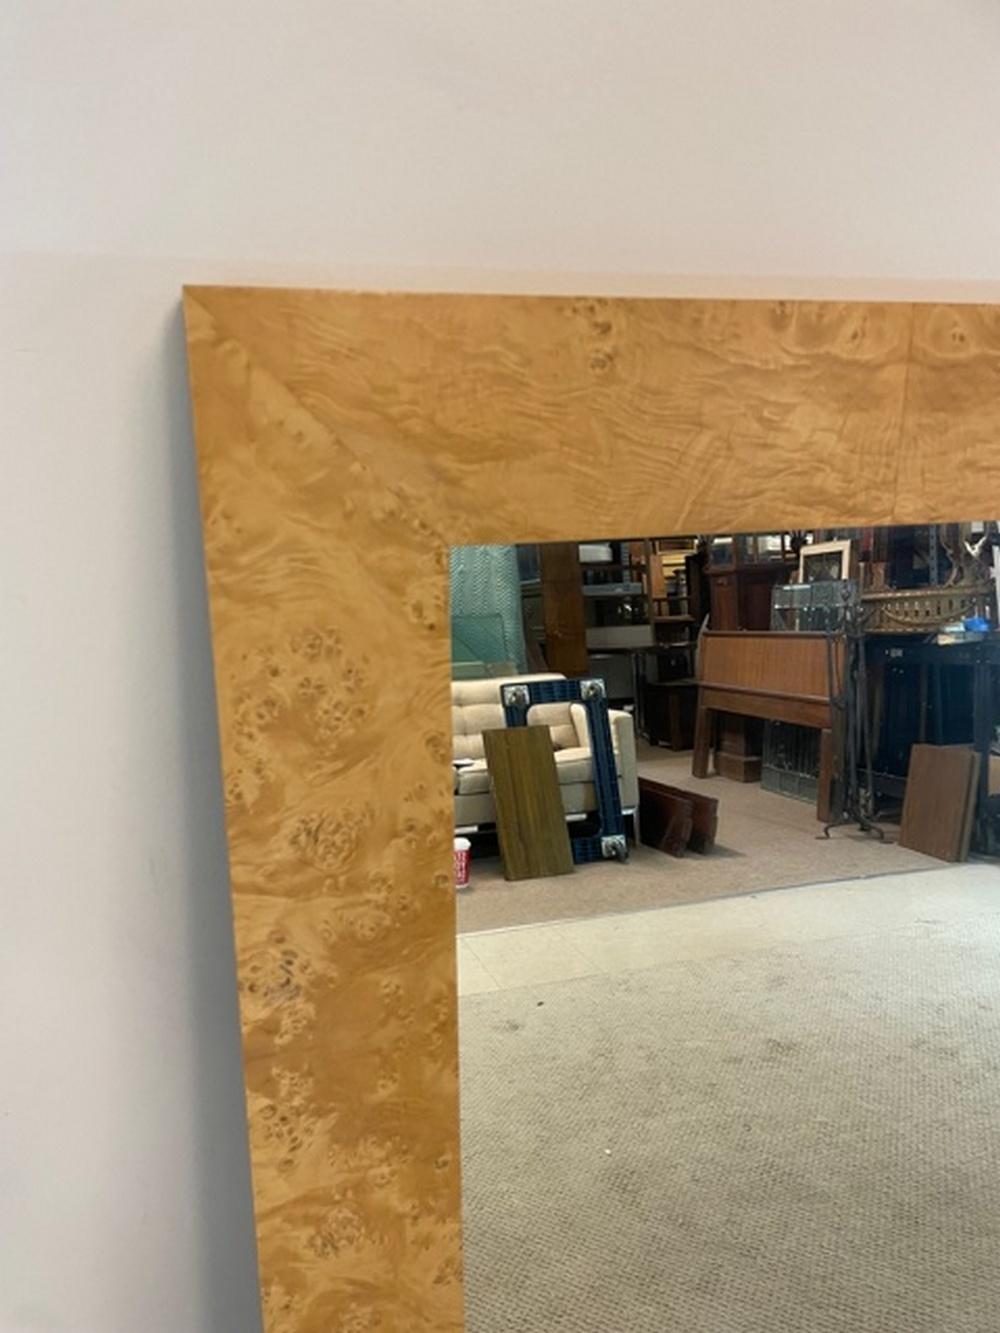 Mid Century Modern olive wood modern framed mirror. Original finish in excellent condition. Dimensions: 2